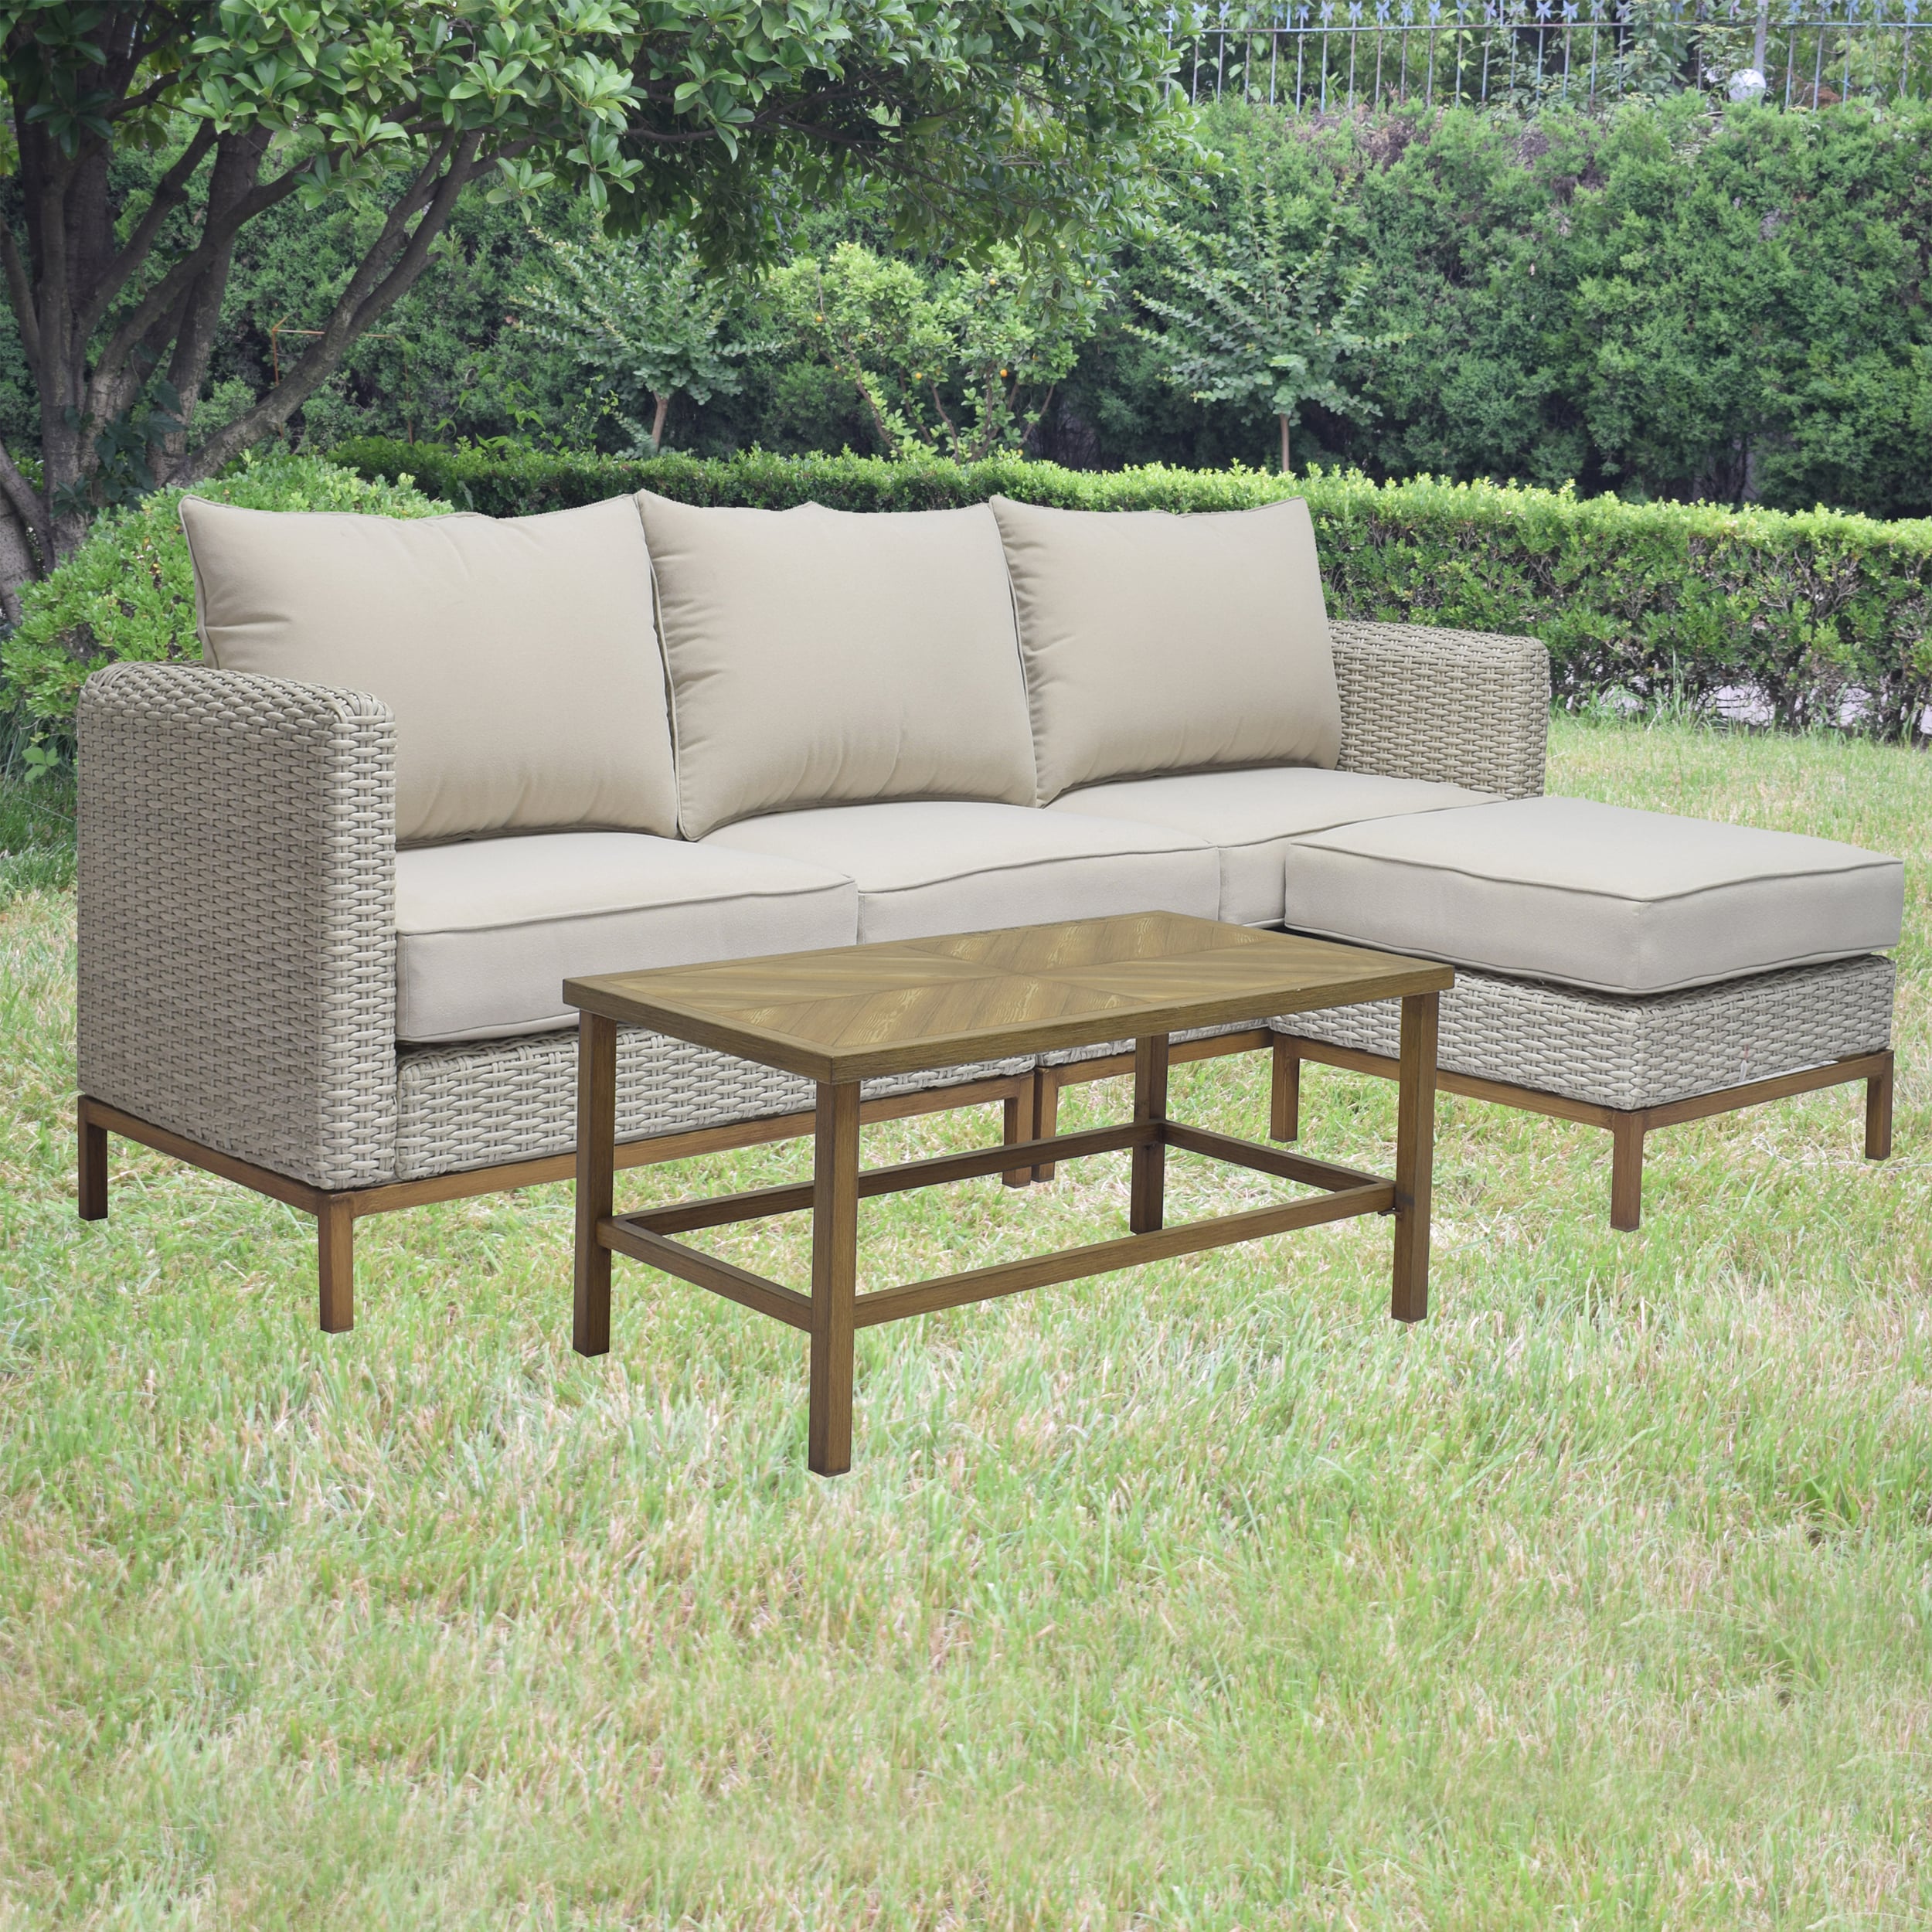 Wer zuerst kommt Origin 21 Veda the Wicker Conversation Cushions at department Patio 4-Piece Sets Springs Patio in Off-white with Set Conversation